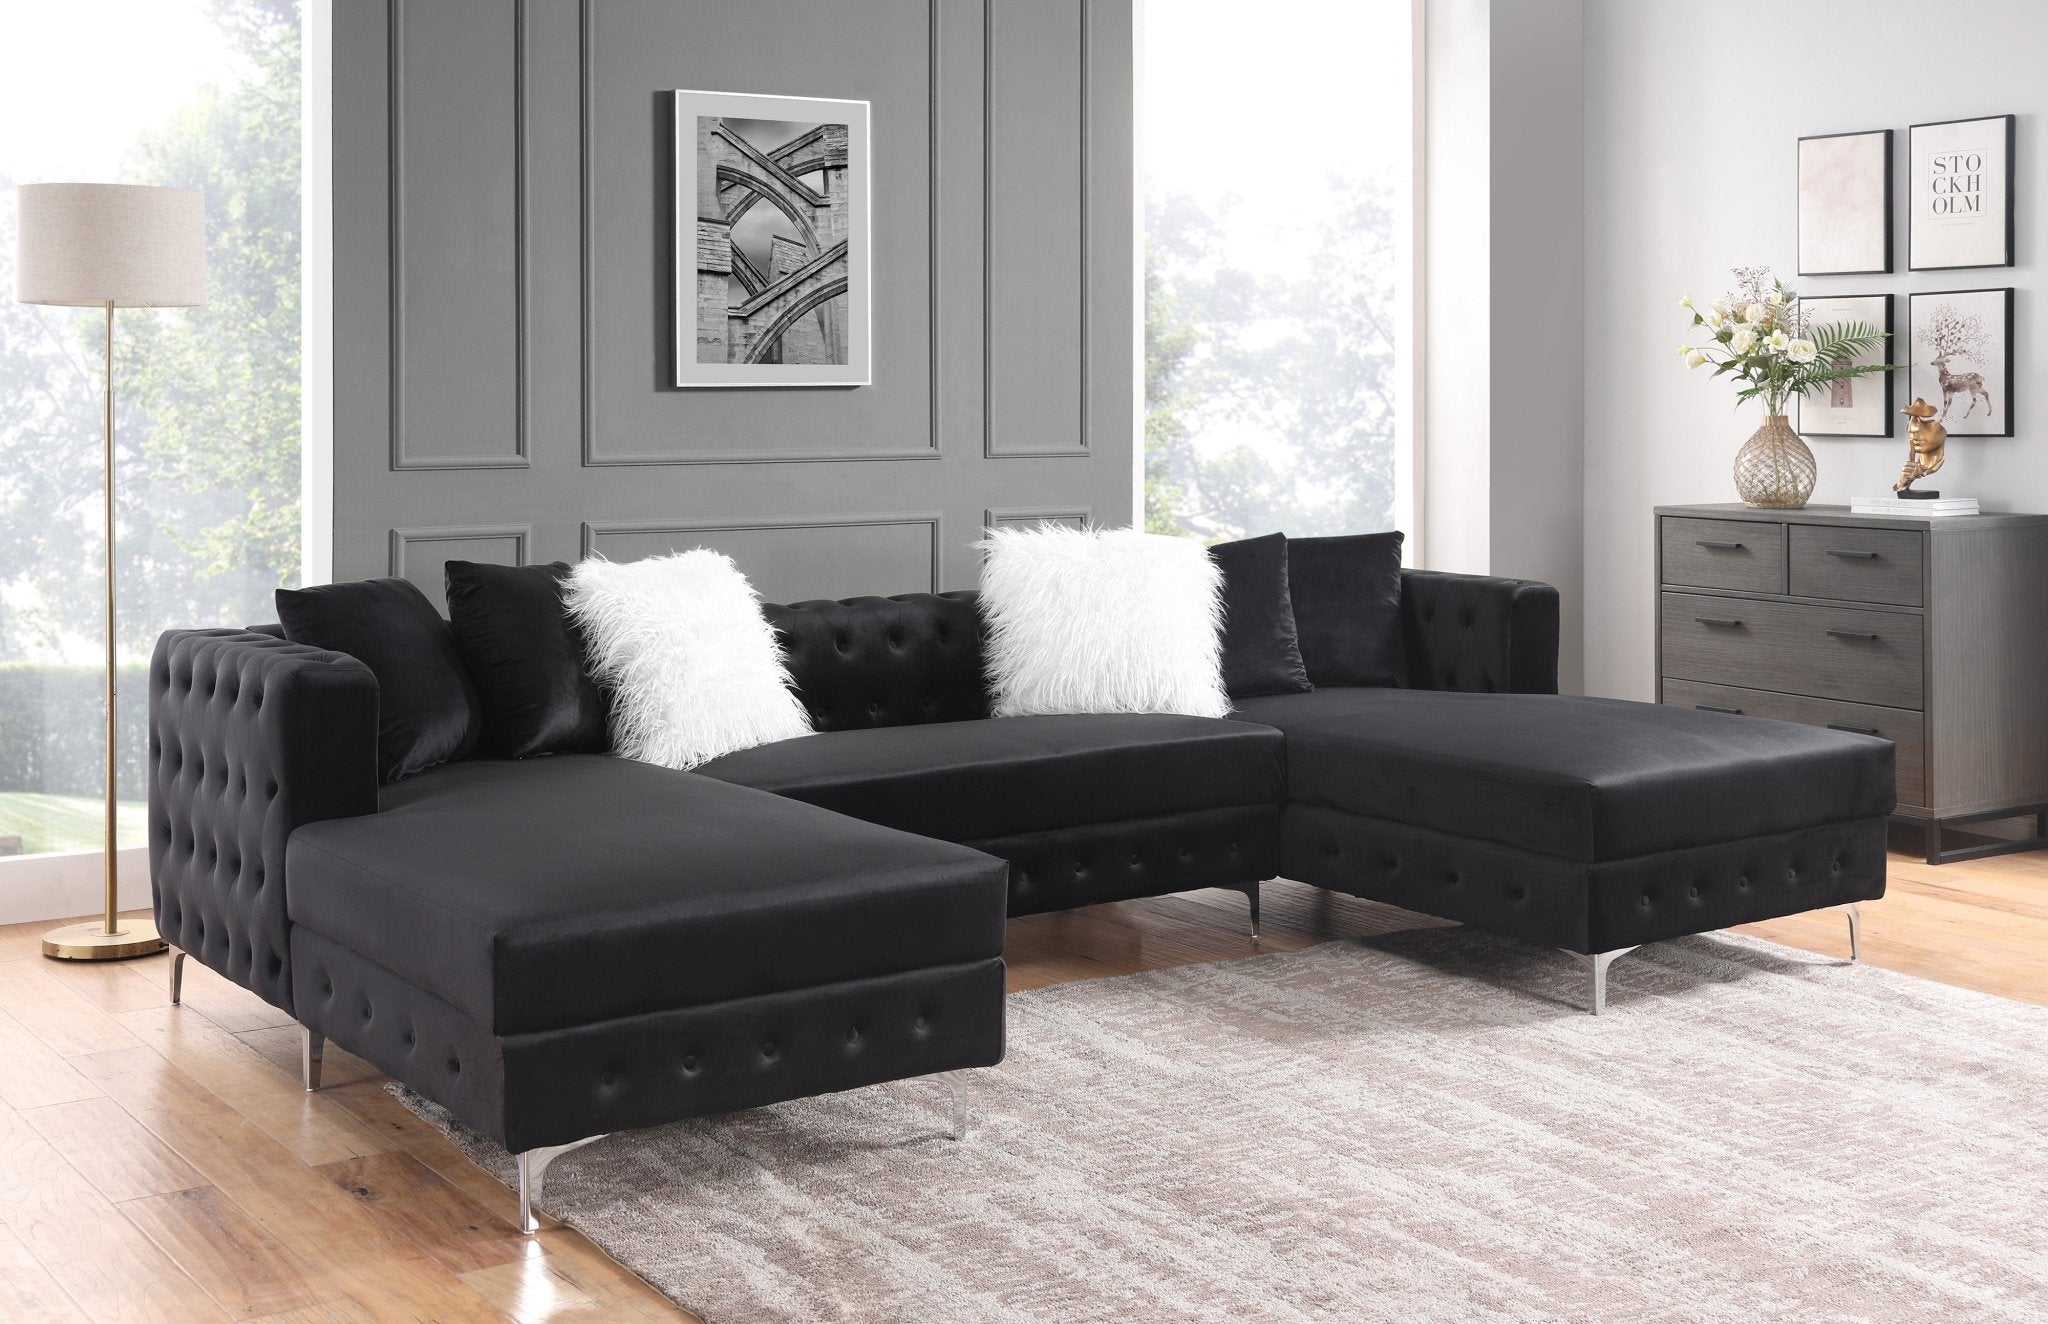 4 PIECE SECTIONAL - BEL Furniture